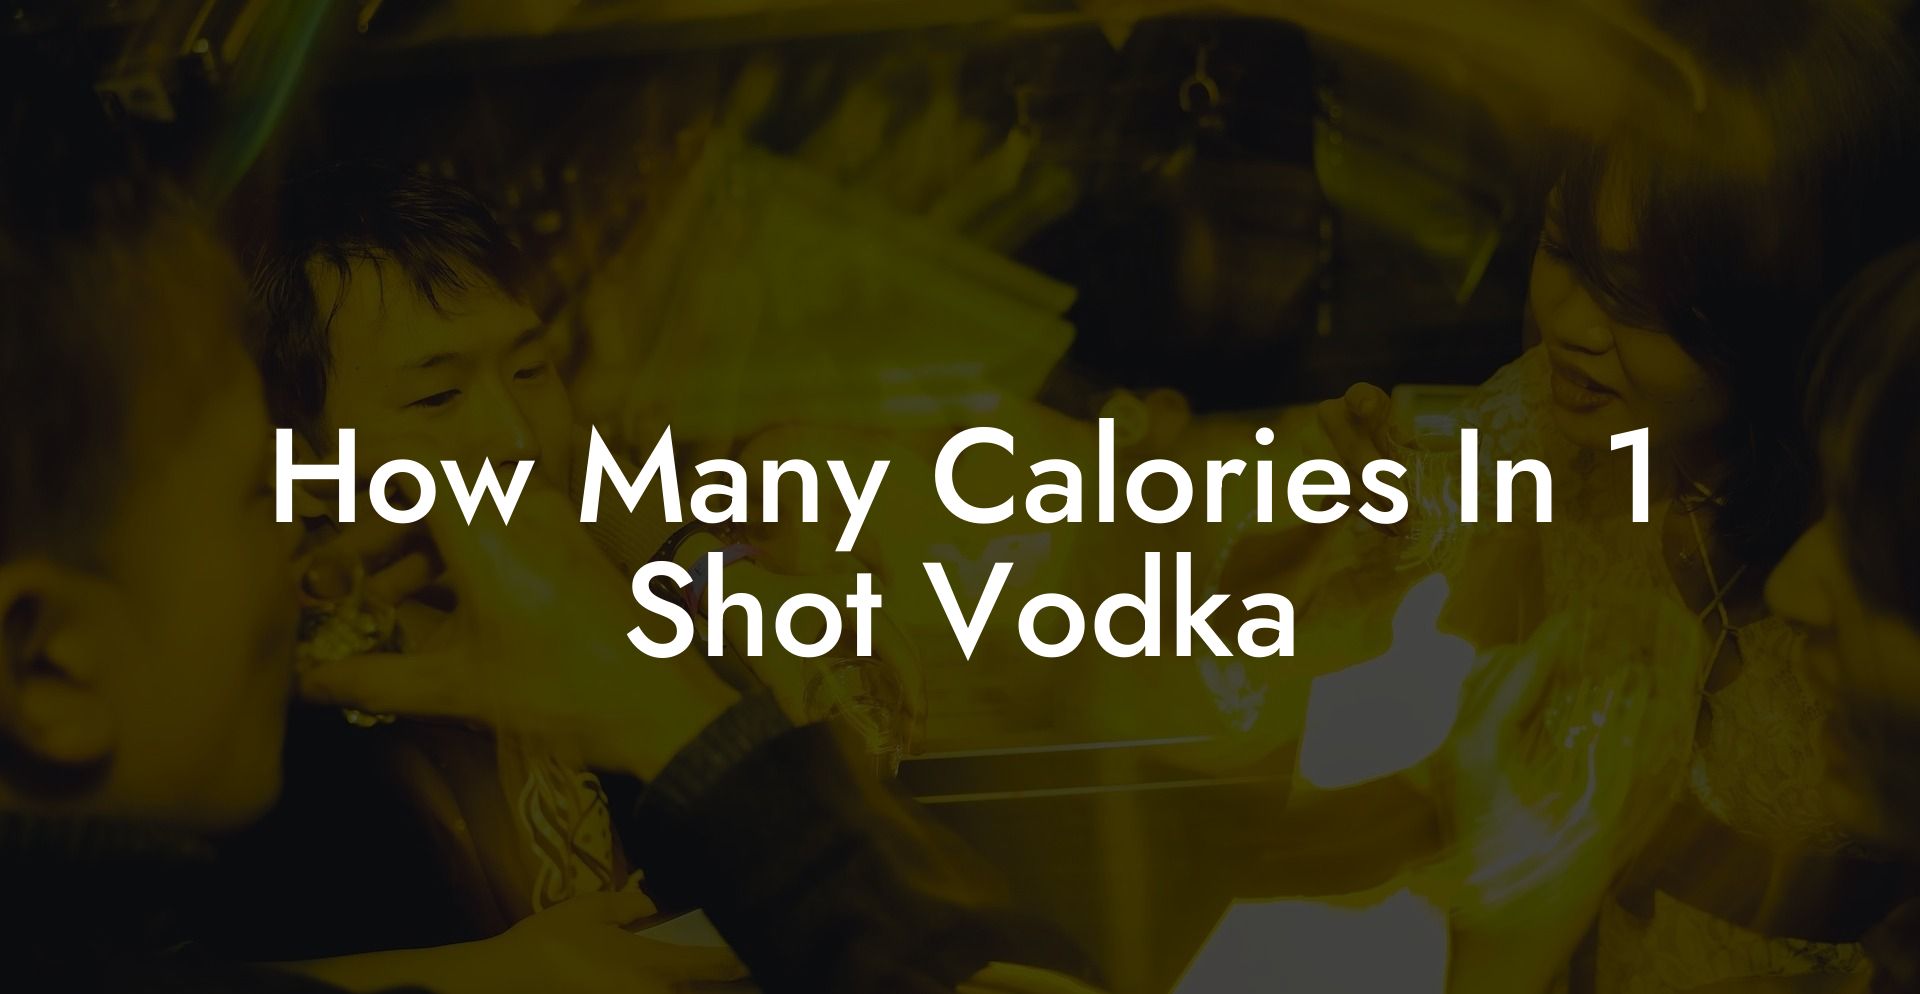 How Many Calories In 1 Shot Vodka